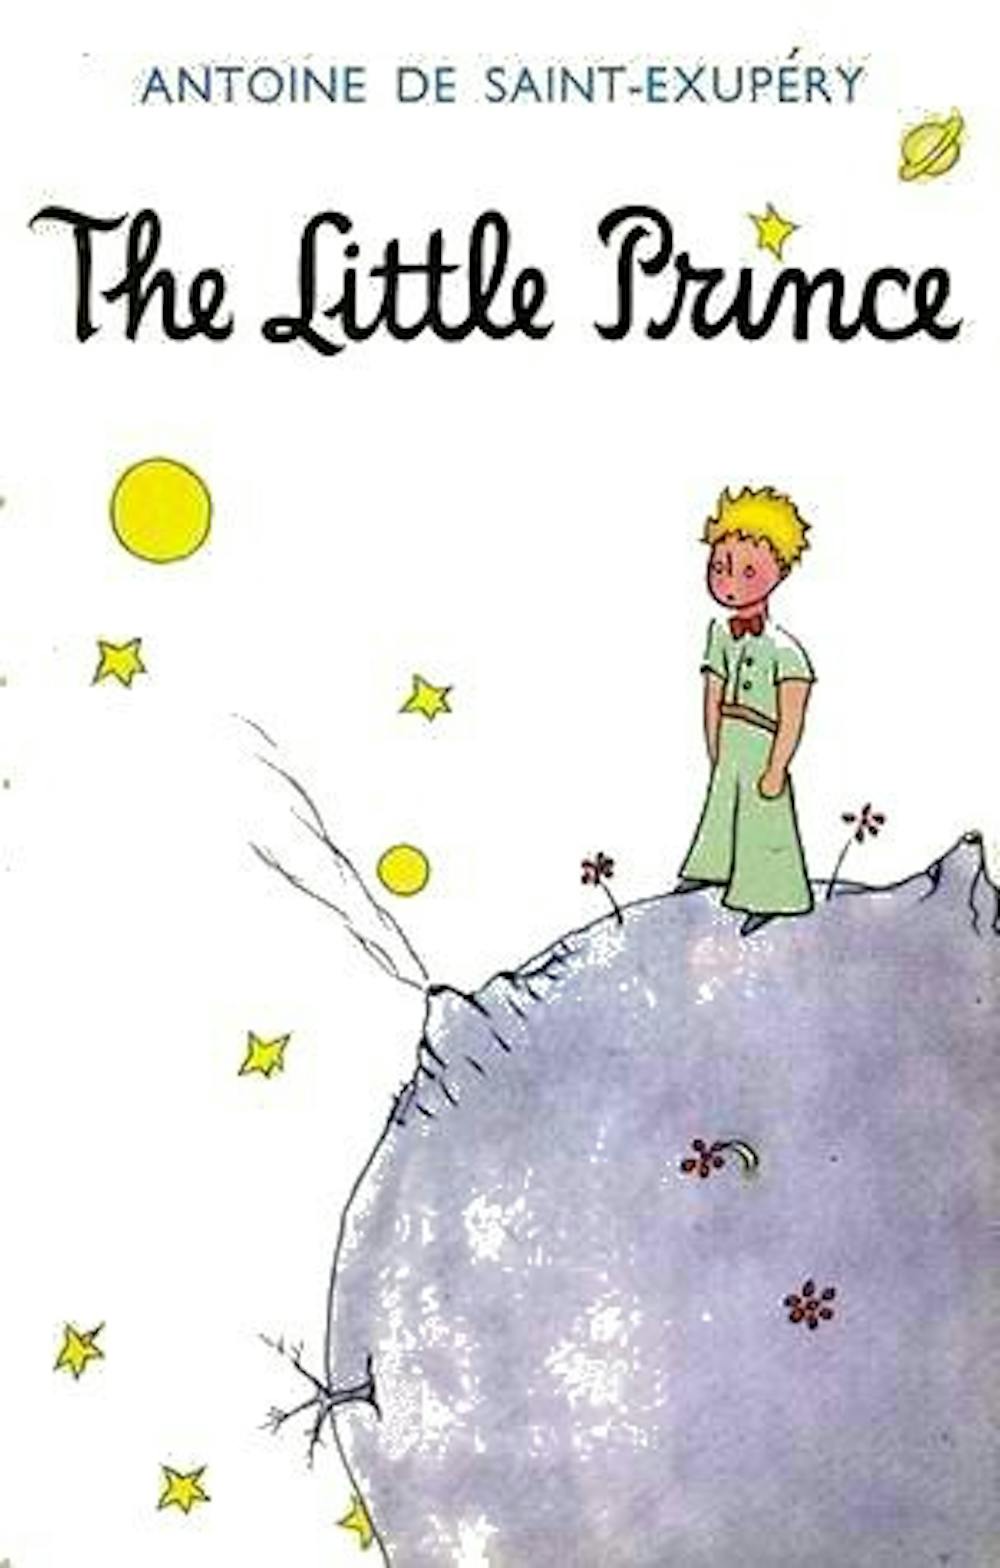 How To Live Like the Little Prince Book